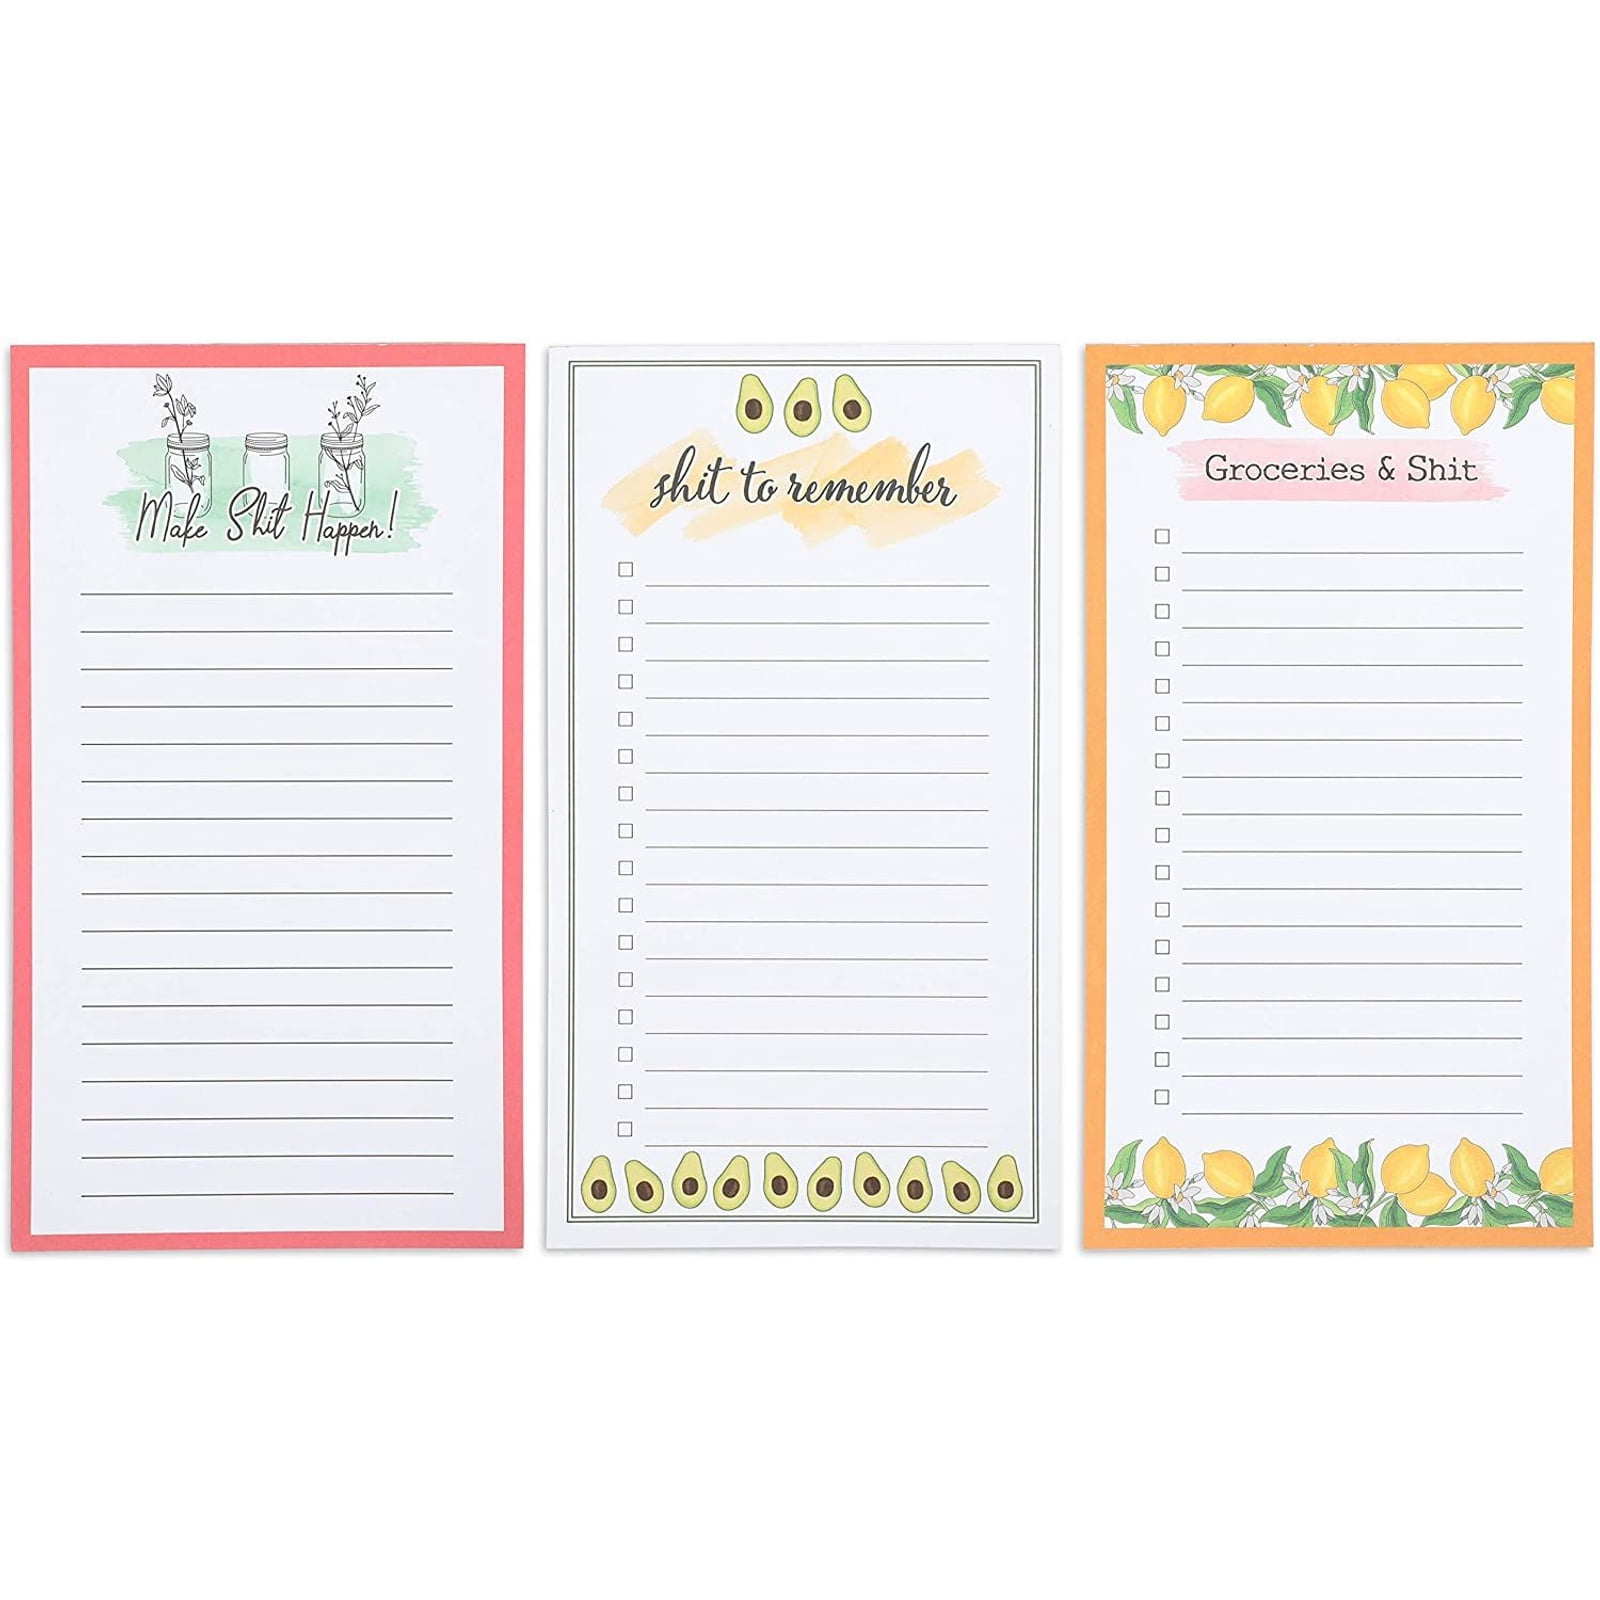 Kitchen Fridge Magnetic Memo Shopping Pad & Pencil blue or cream with flowers 